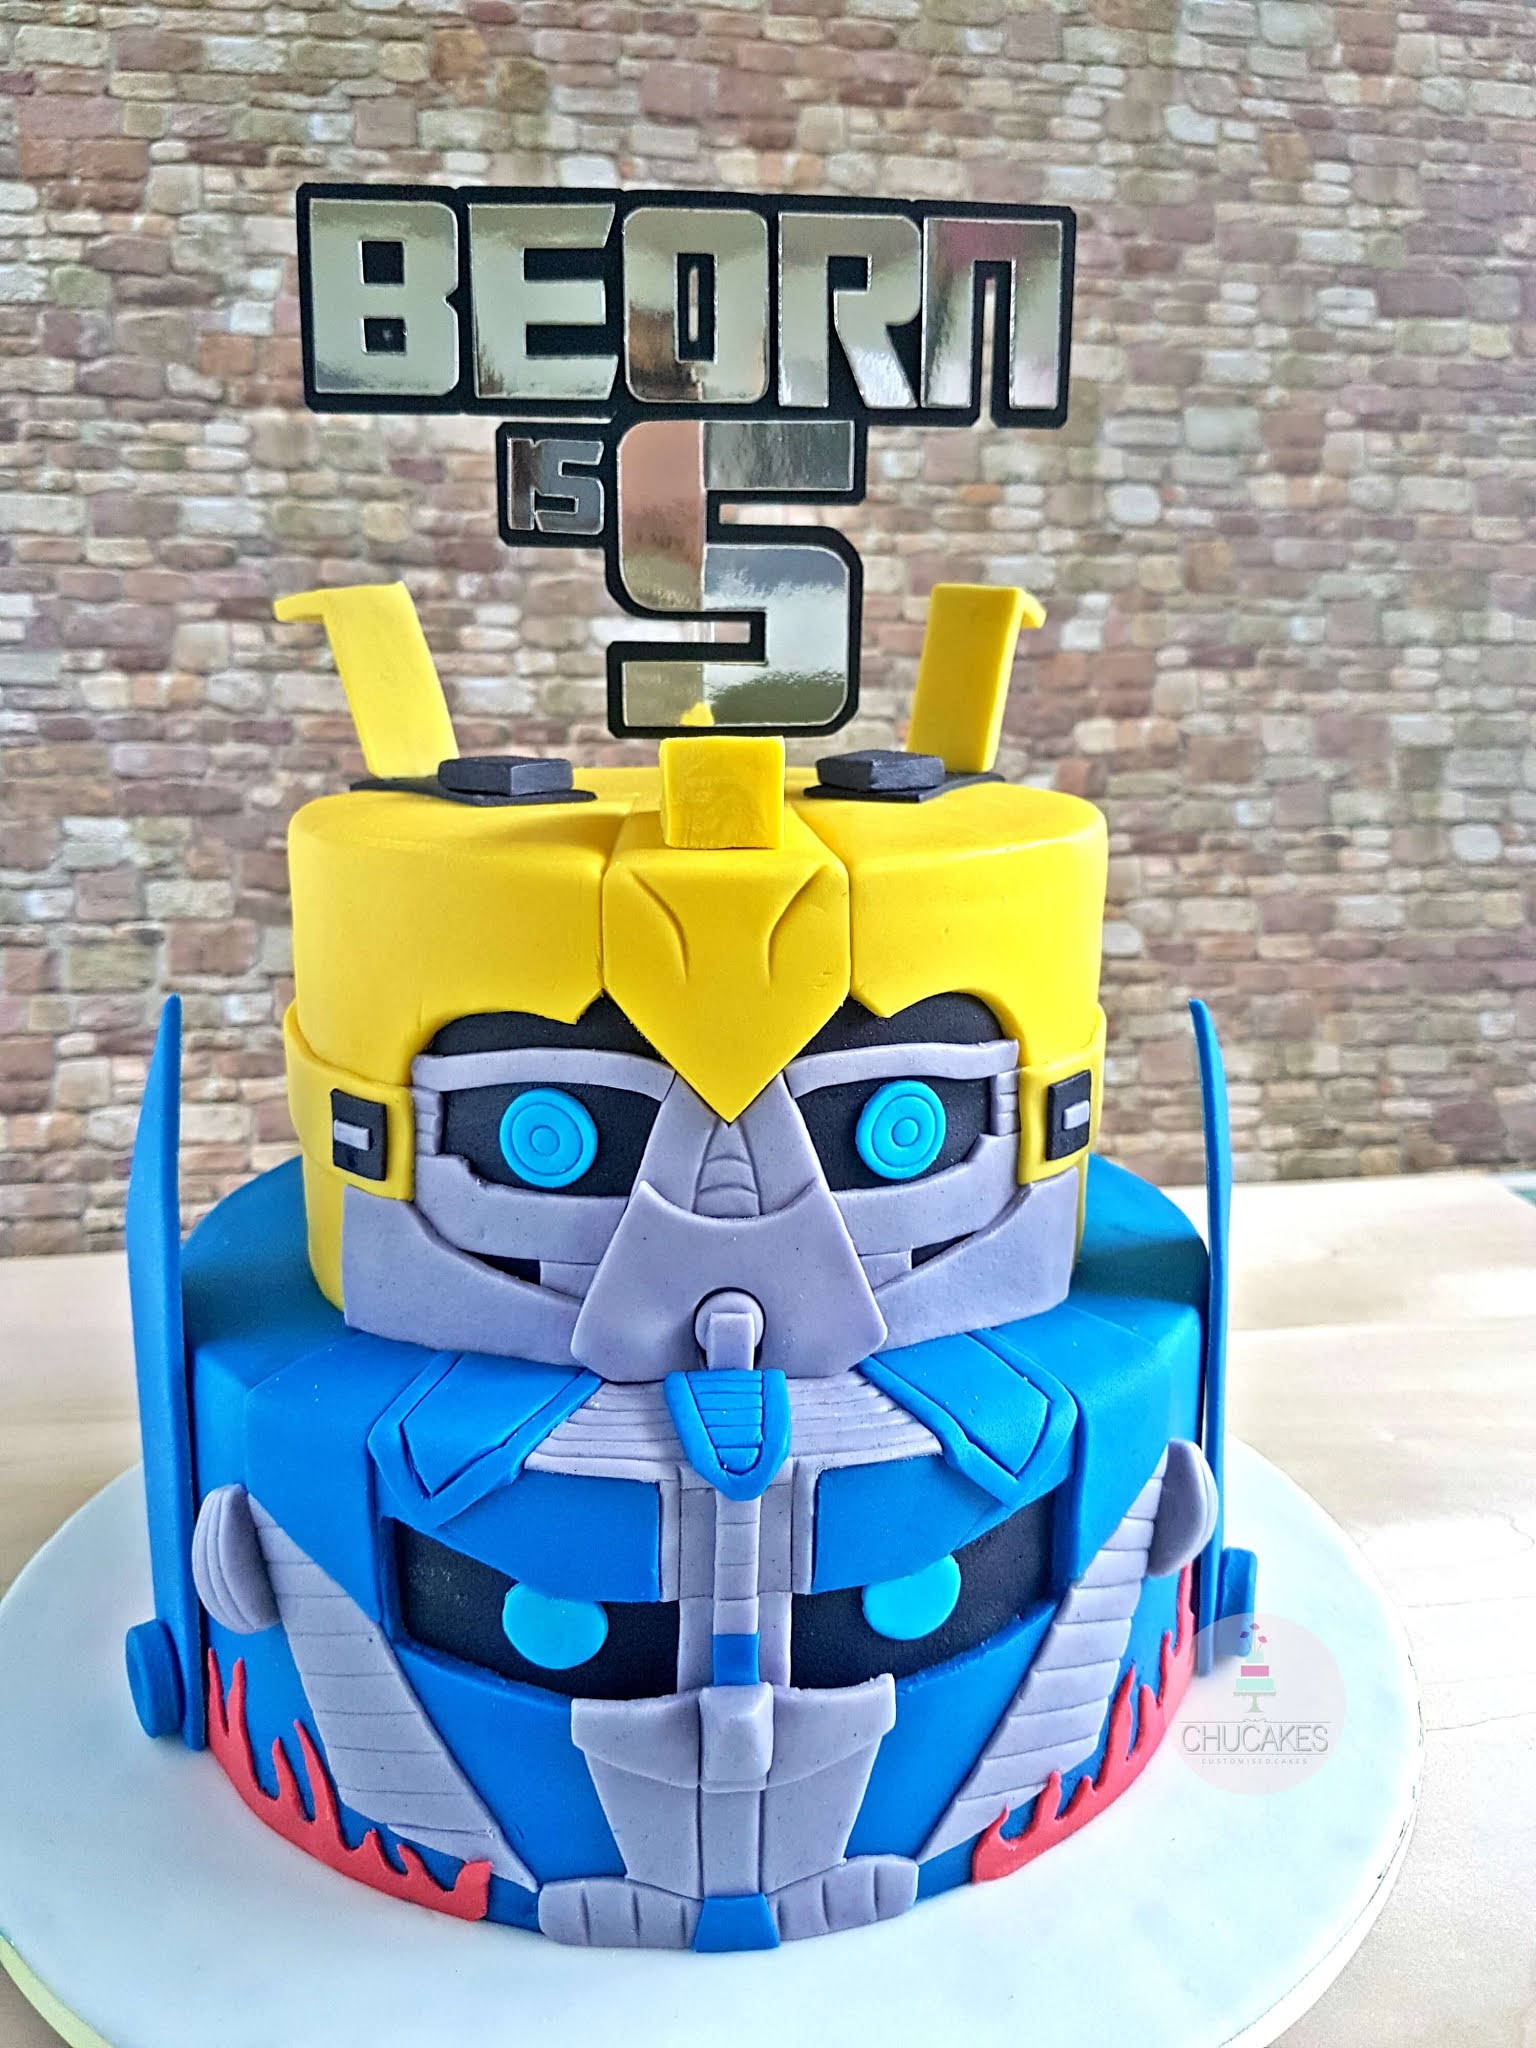 Lego Star Wars Cake for Birthday (How to Make) | Decorated Treats